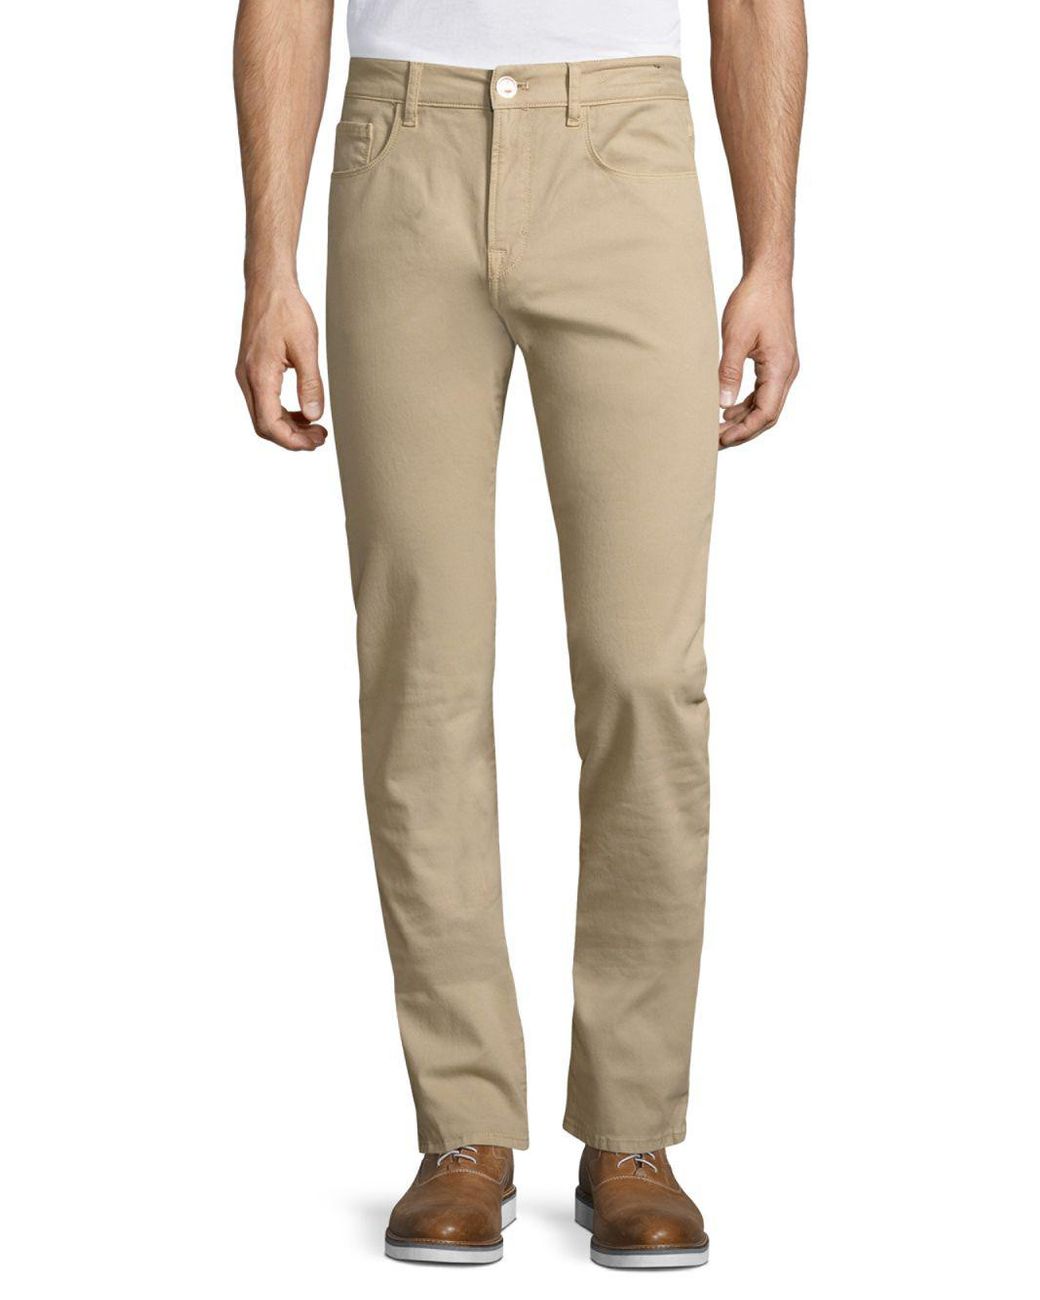 PT01 Lux Slim Stretch Pt05 Tricotine Jeans in Natural for Men - Lyst